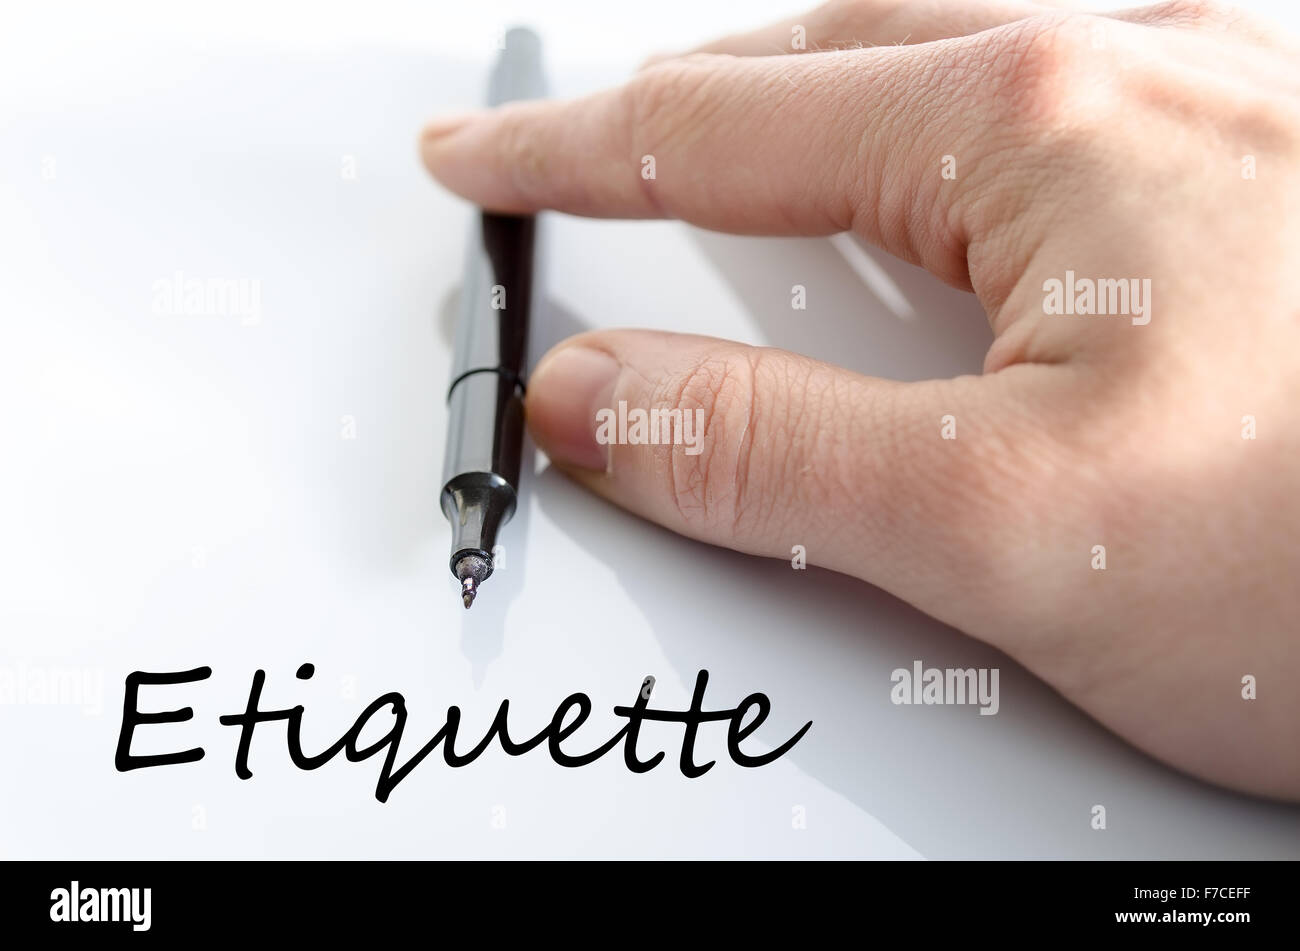 Etiquette text concept isolated over white background Stock Photo